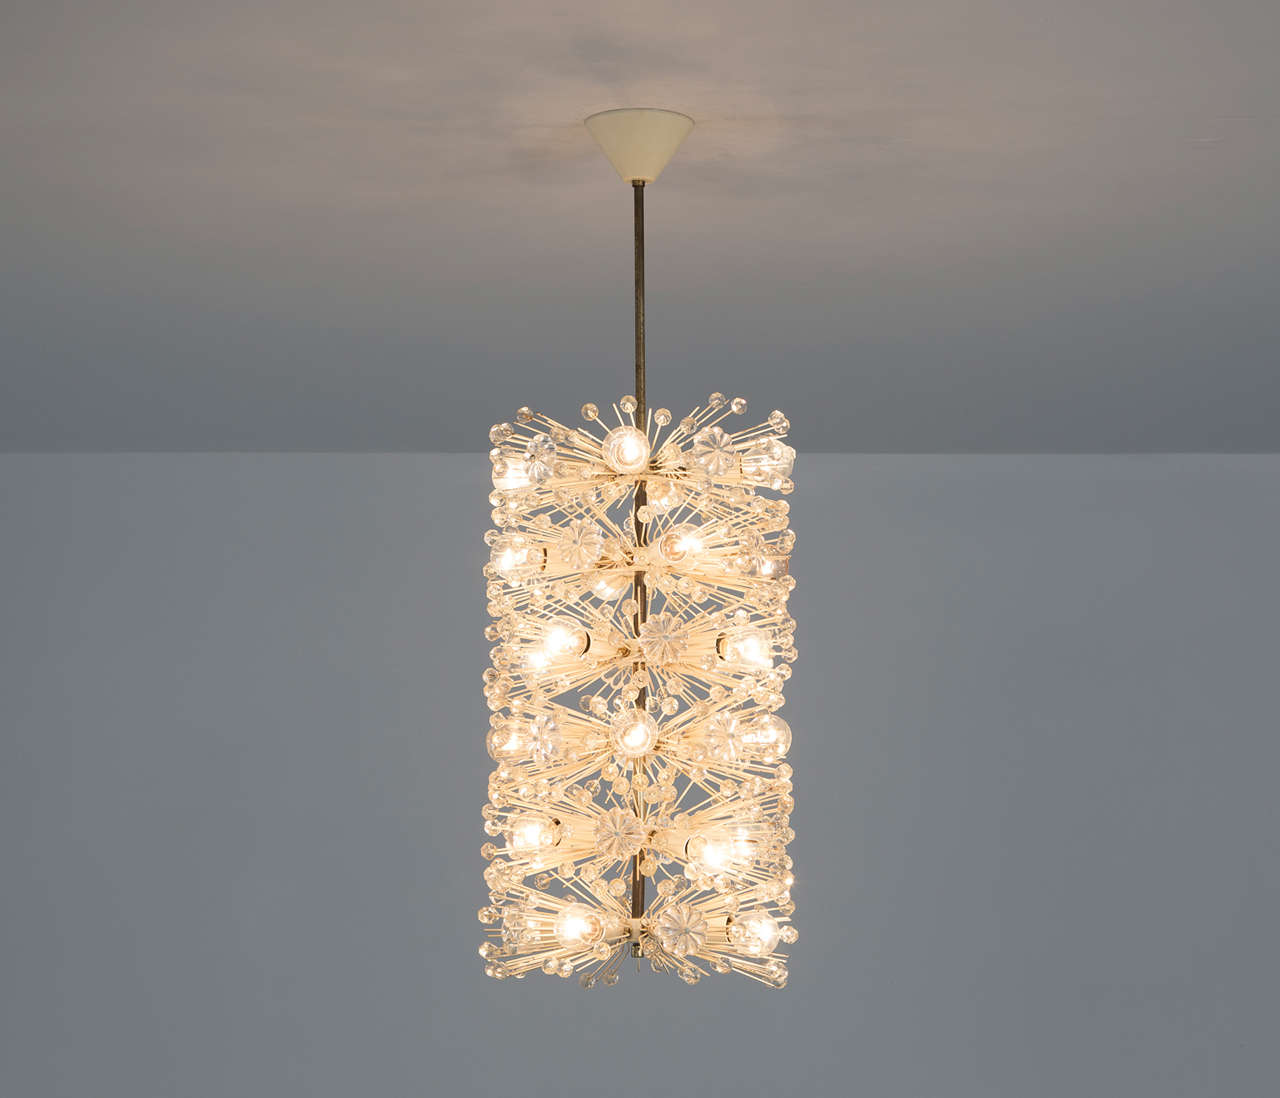 Emil Stjenar for Rupert E. Nikoll, Austria, 1960s.

The flower shaped glass decorations are an icon for the designs of Stejnar. Very rare cylindrical shaped chandelier by 
The brass stem is nicely decorated with white lacquered steel rods all